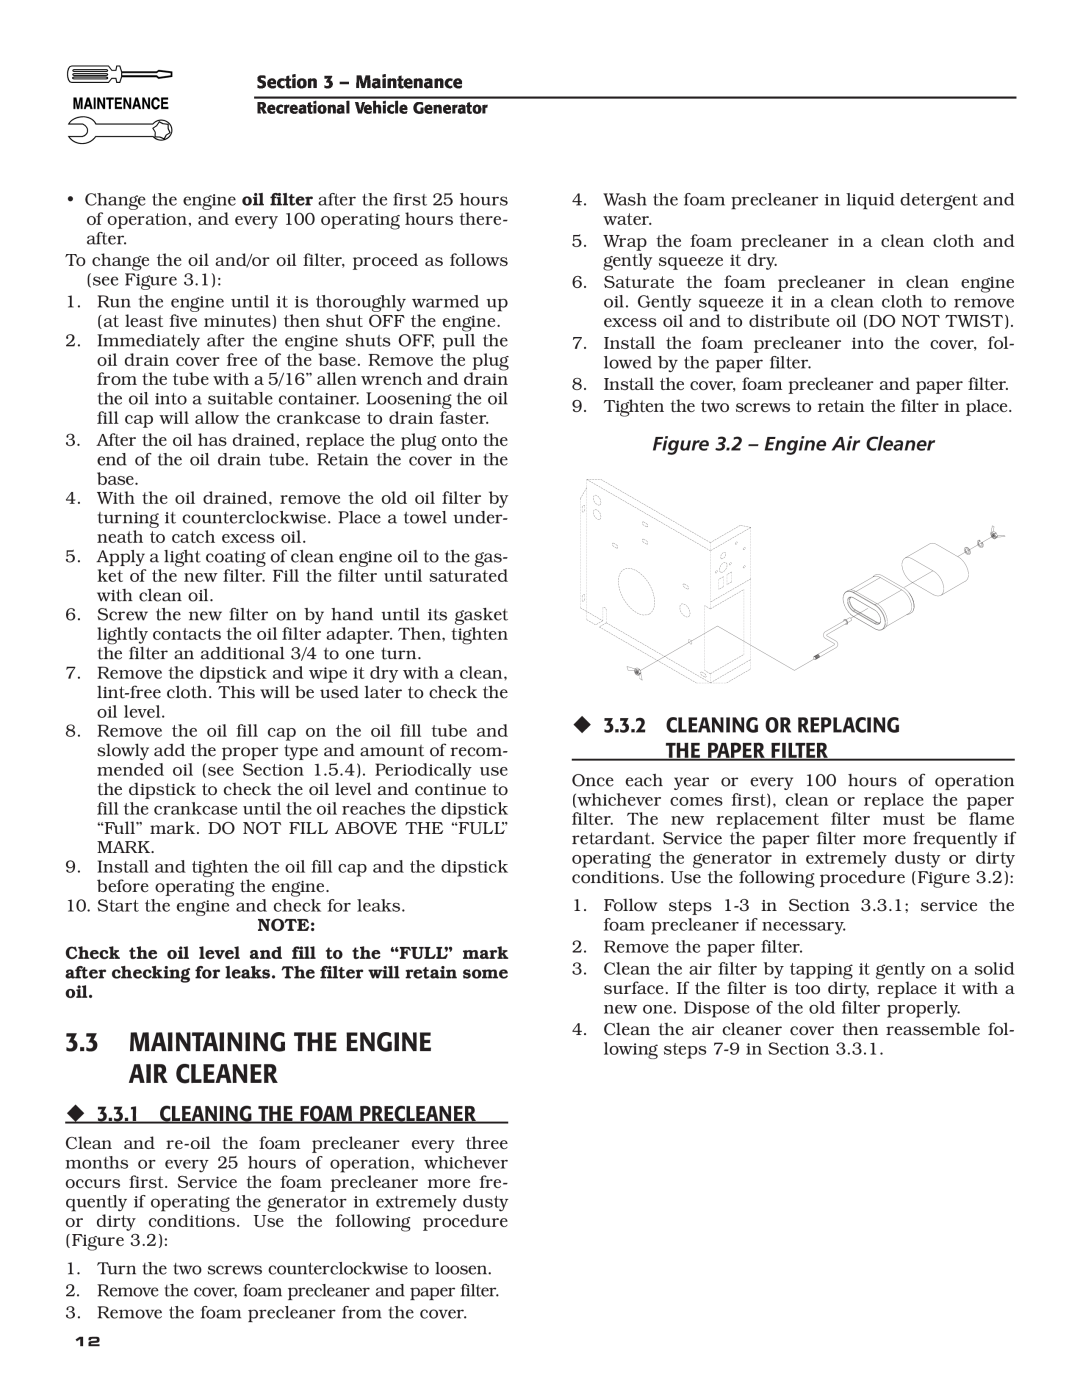 Generac Power Systems 004700-00 owner manual Maintaining The Engine Air Cleaner, ‹ 3.3.1 CLEANING THE FOAM PRECLEANER 